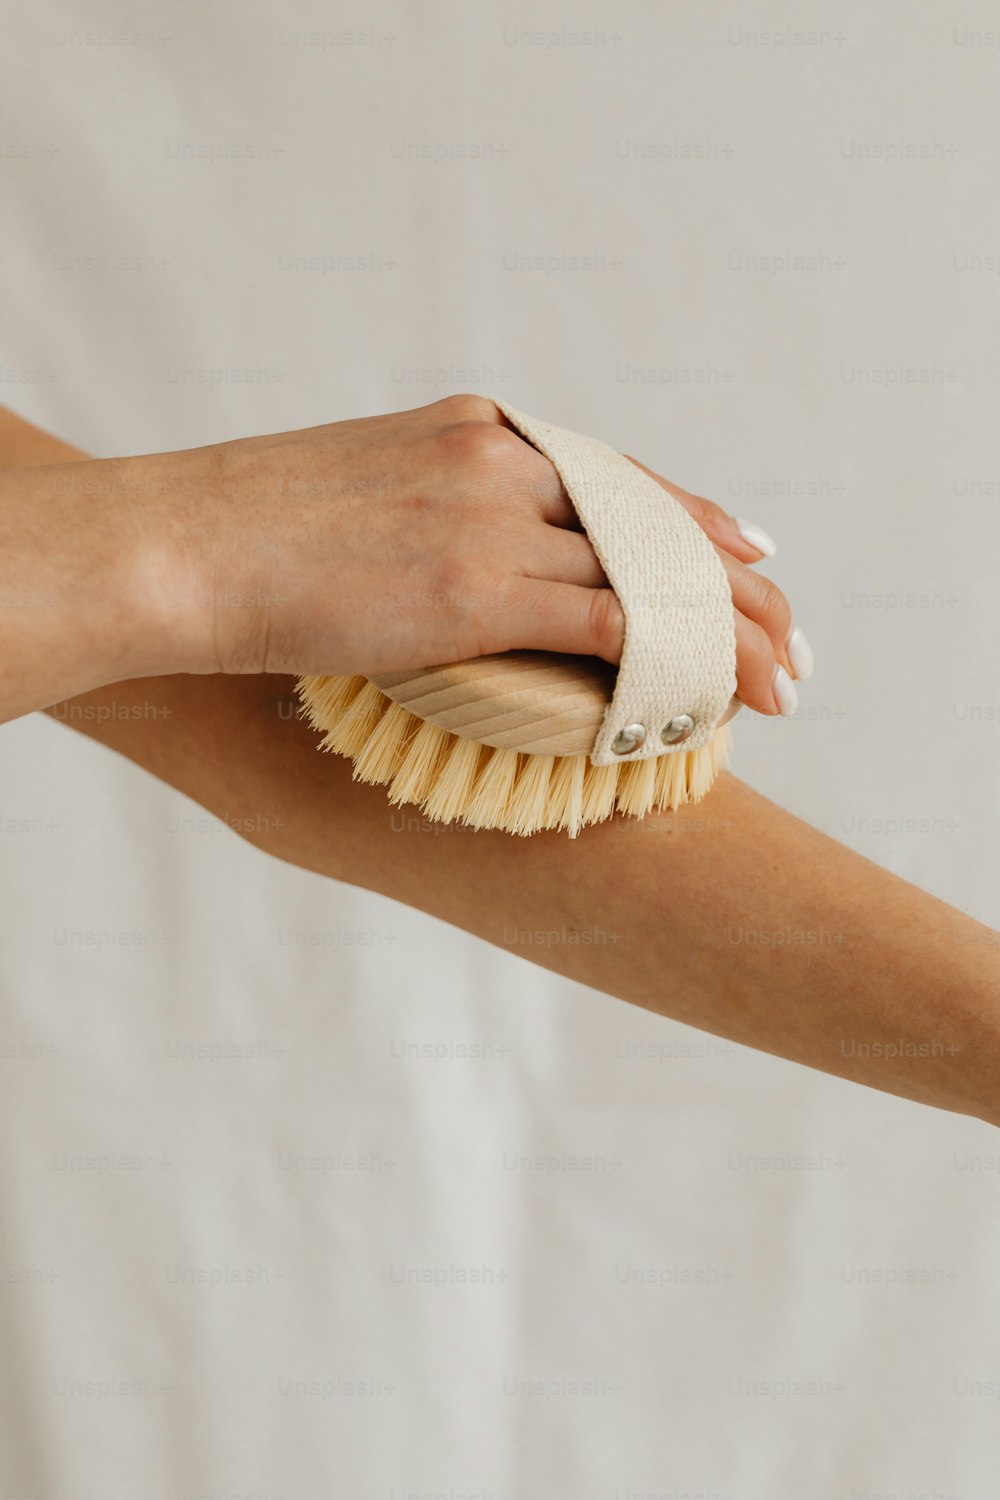 a woman's hand holding a brush on a white background